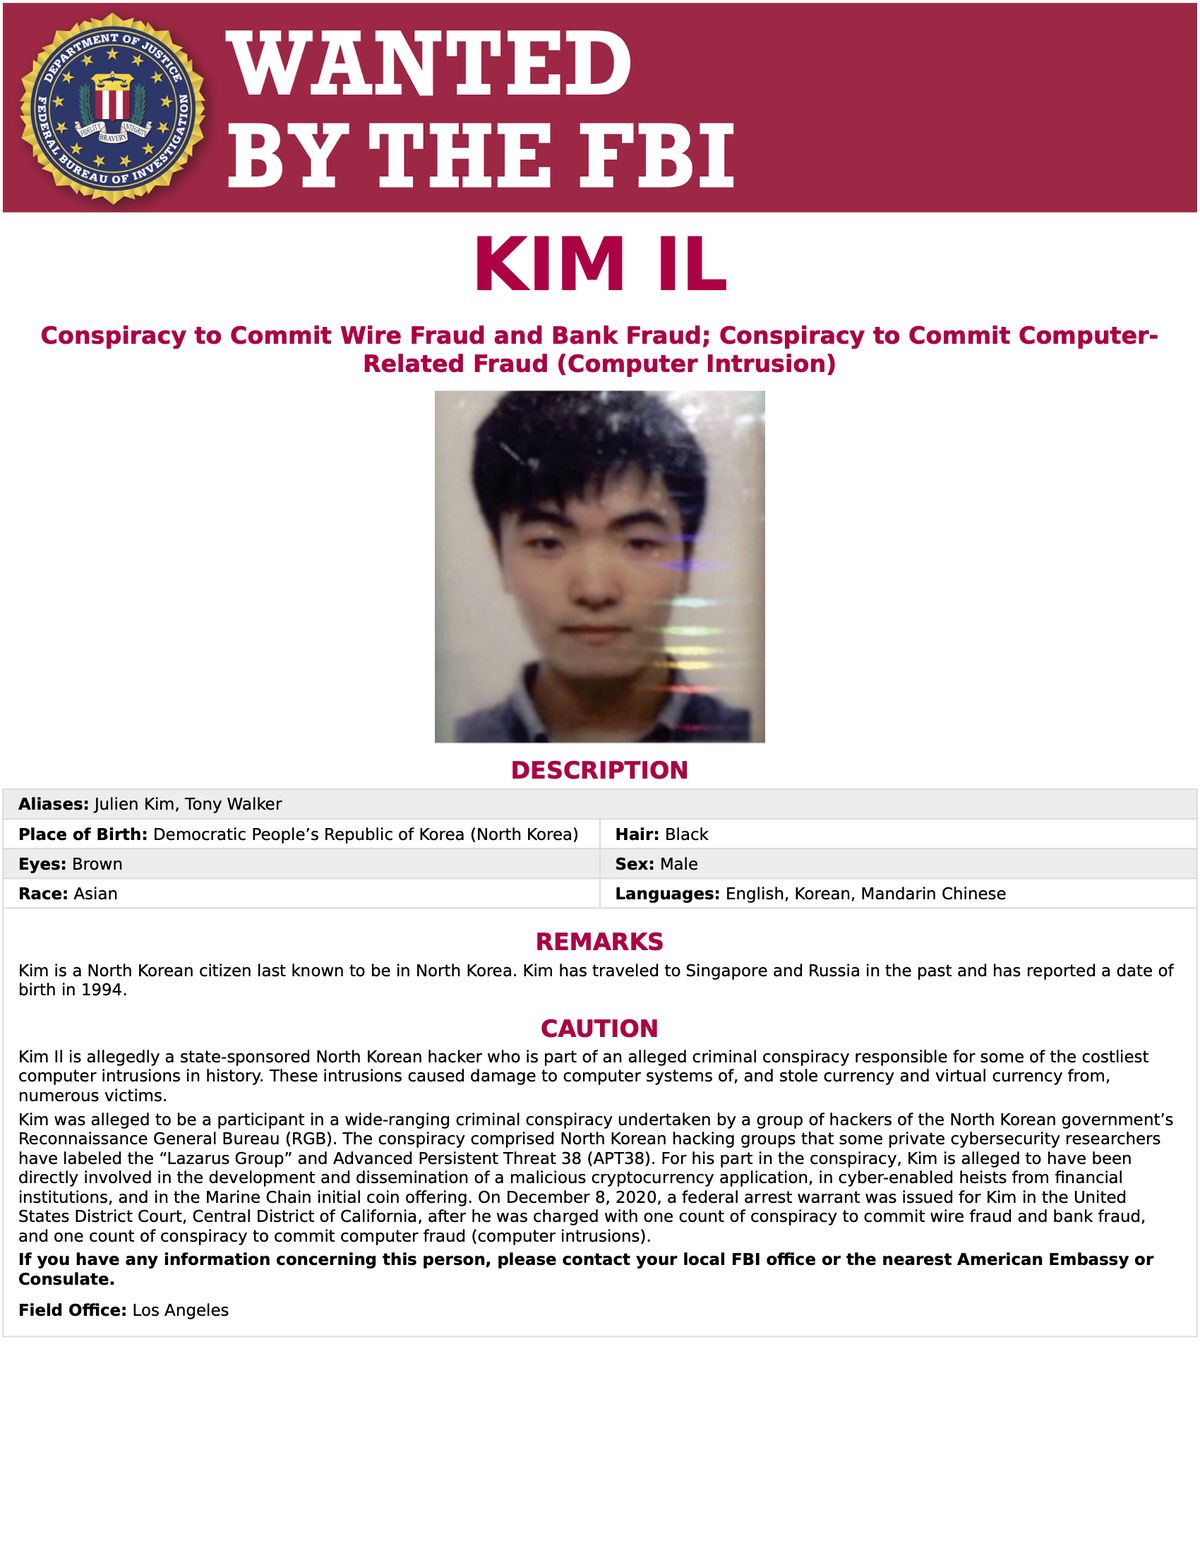 This wanted poster released by the Department of Justice shows Kim Il, who prosecutors say is a member of a North Korean military intelligence agency and carried out hacks at the behest of the government with a goal of using pilfered funds for the benefit of the regime. The Justice Department has charged three North Korean computer programmers in a broad range of global and destructive hacks, including targeting banks and a movie studio. That